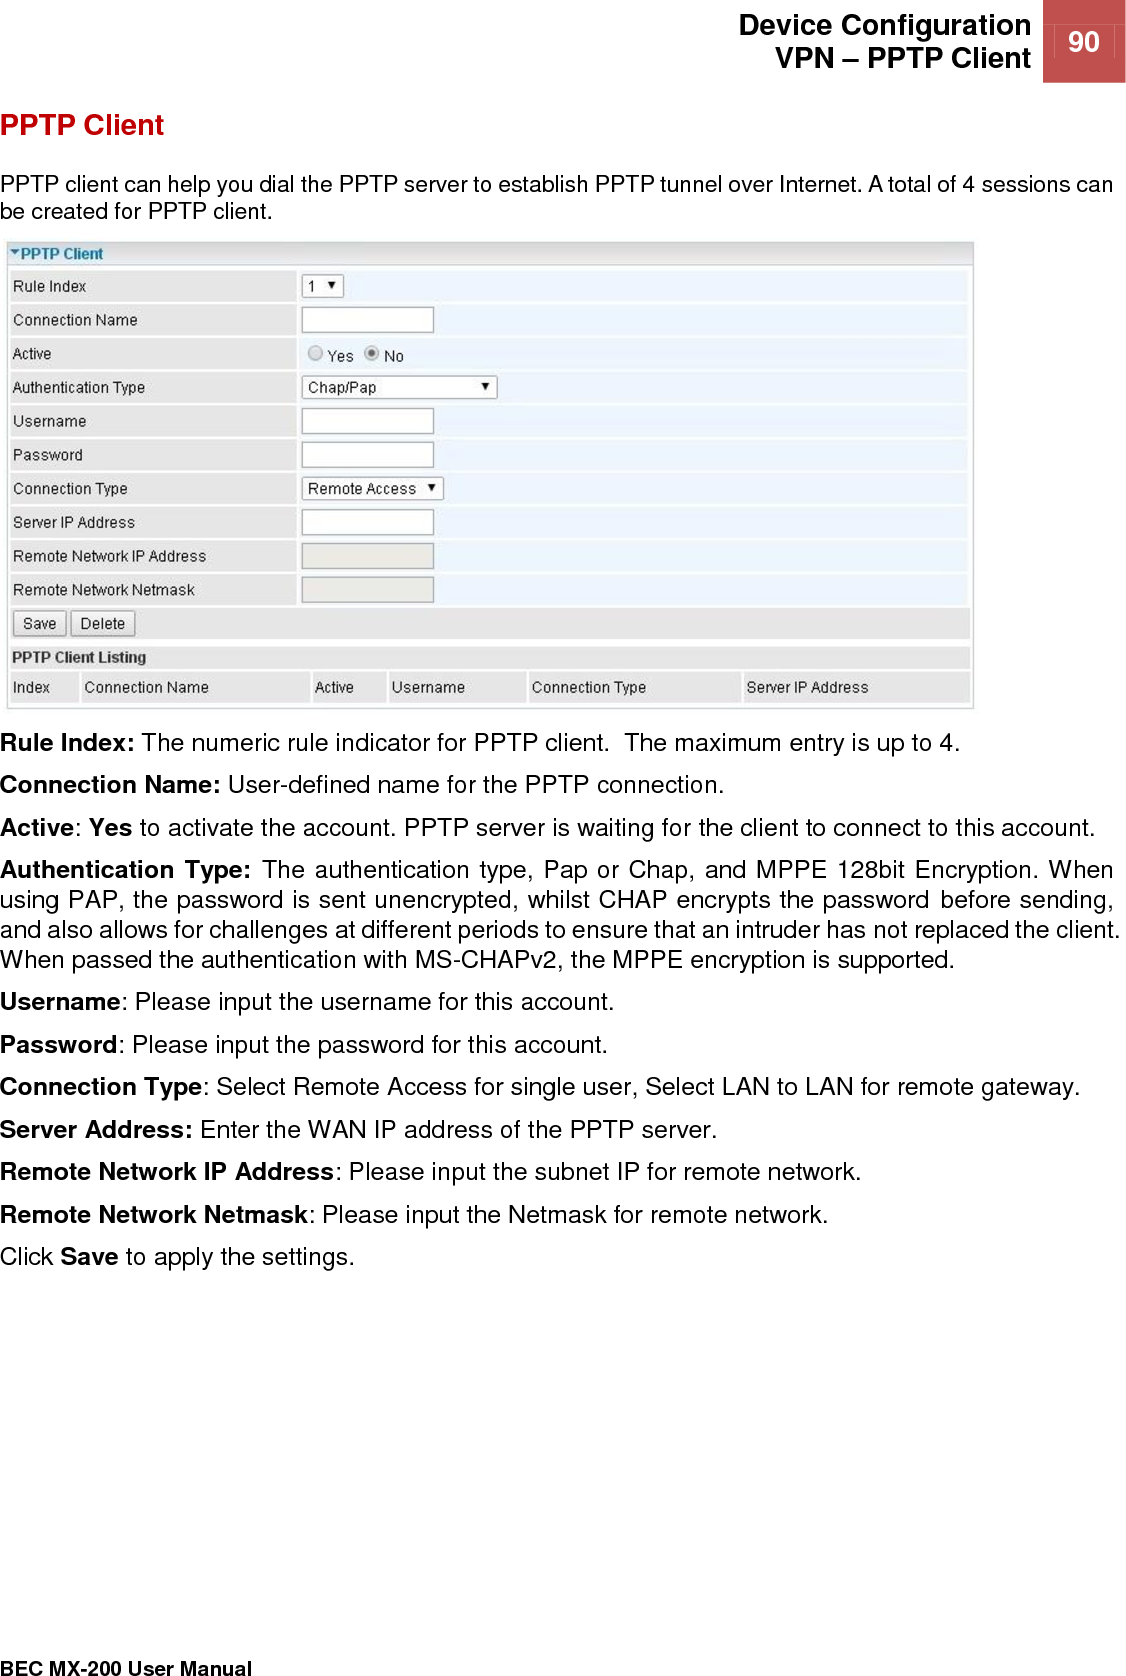  Device Configuration VPN – PPTP Client 90   BEC MX-200 User Manual  PPTP Client PPTP client can help you dial the PPTP server to establish PPTP tunnel over Internet. A total of 4 sessions can be created for PPTP client.  Rule Index: The numeric rule indicator for PPTP client.  The maximum entry is up to 4. Connection Name: User-defined name for the PPTP connection. Active: Yes to activate the account. PPTP server is waiting for the client to connect to this account. Authentication Type: The authentication type, Pap or Chap, and MPPE 128bit Encryption. When using PAP, the password is sent unencrypted, whilst CHAP encrypts the password before sending, and also allows for challenges at different periods to ensure that an intruder has not replaced the client. When passed the authentication with MS-CHAPv2, the MPPE encryption is supported. Username: Please input the username for this account. Password: Please input the password for this account. Connection Type: Select Remote Access for single user, Select LAN to LAN for remote gateway. Server Address: Enter the WAN IP address of the PPTP server. Remote Network IP Address: Please input the subnet IP for remote network. Remote Network Netmask: Please input the Netmask for remote network. Click Save to apply the settings.  